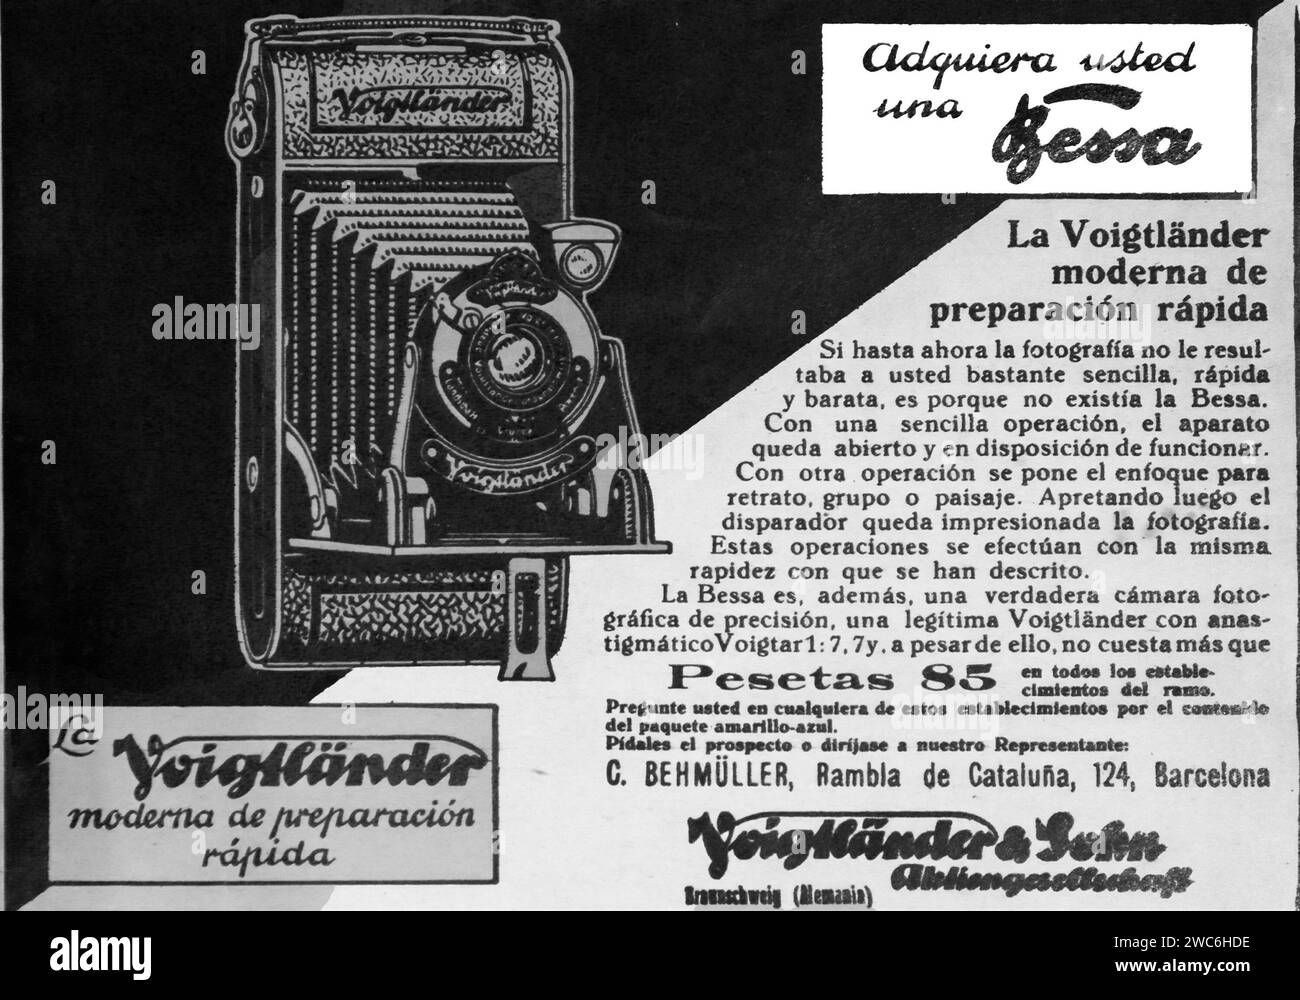 This 1930  image captures a historic advertisement for the Voigtländer camera, showcasing its design and features prominently. Stock Photo